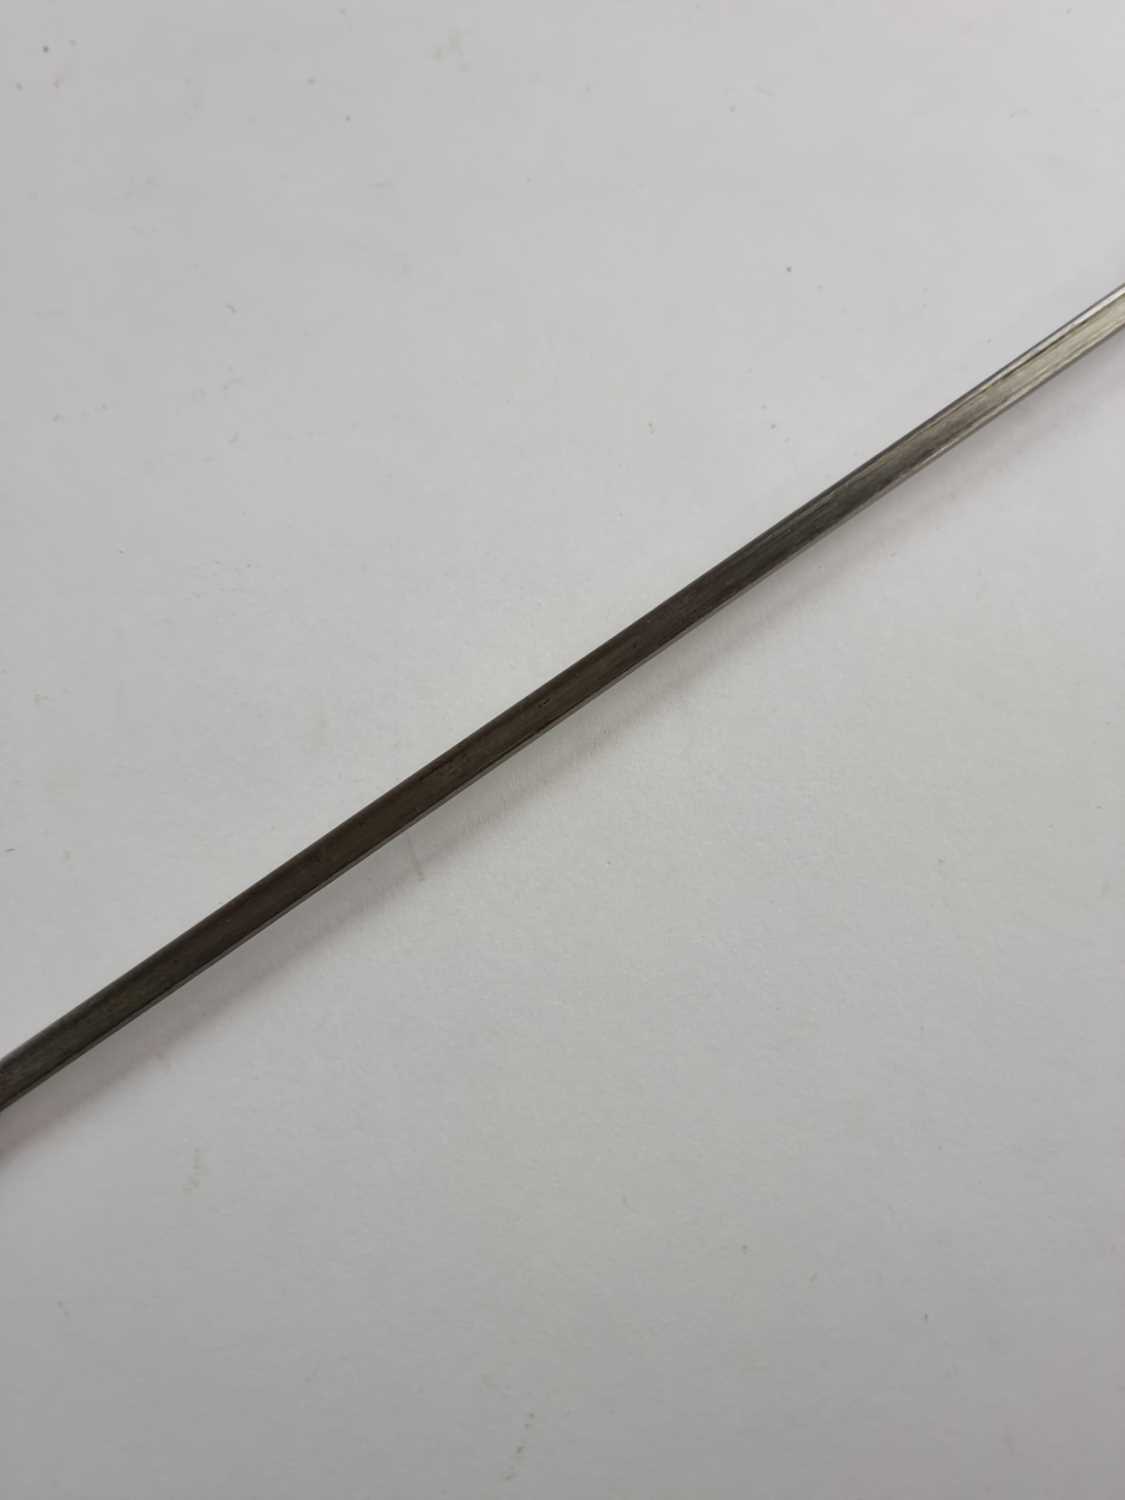 Late-19th century lacquered sword cane - Image 3 of 8